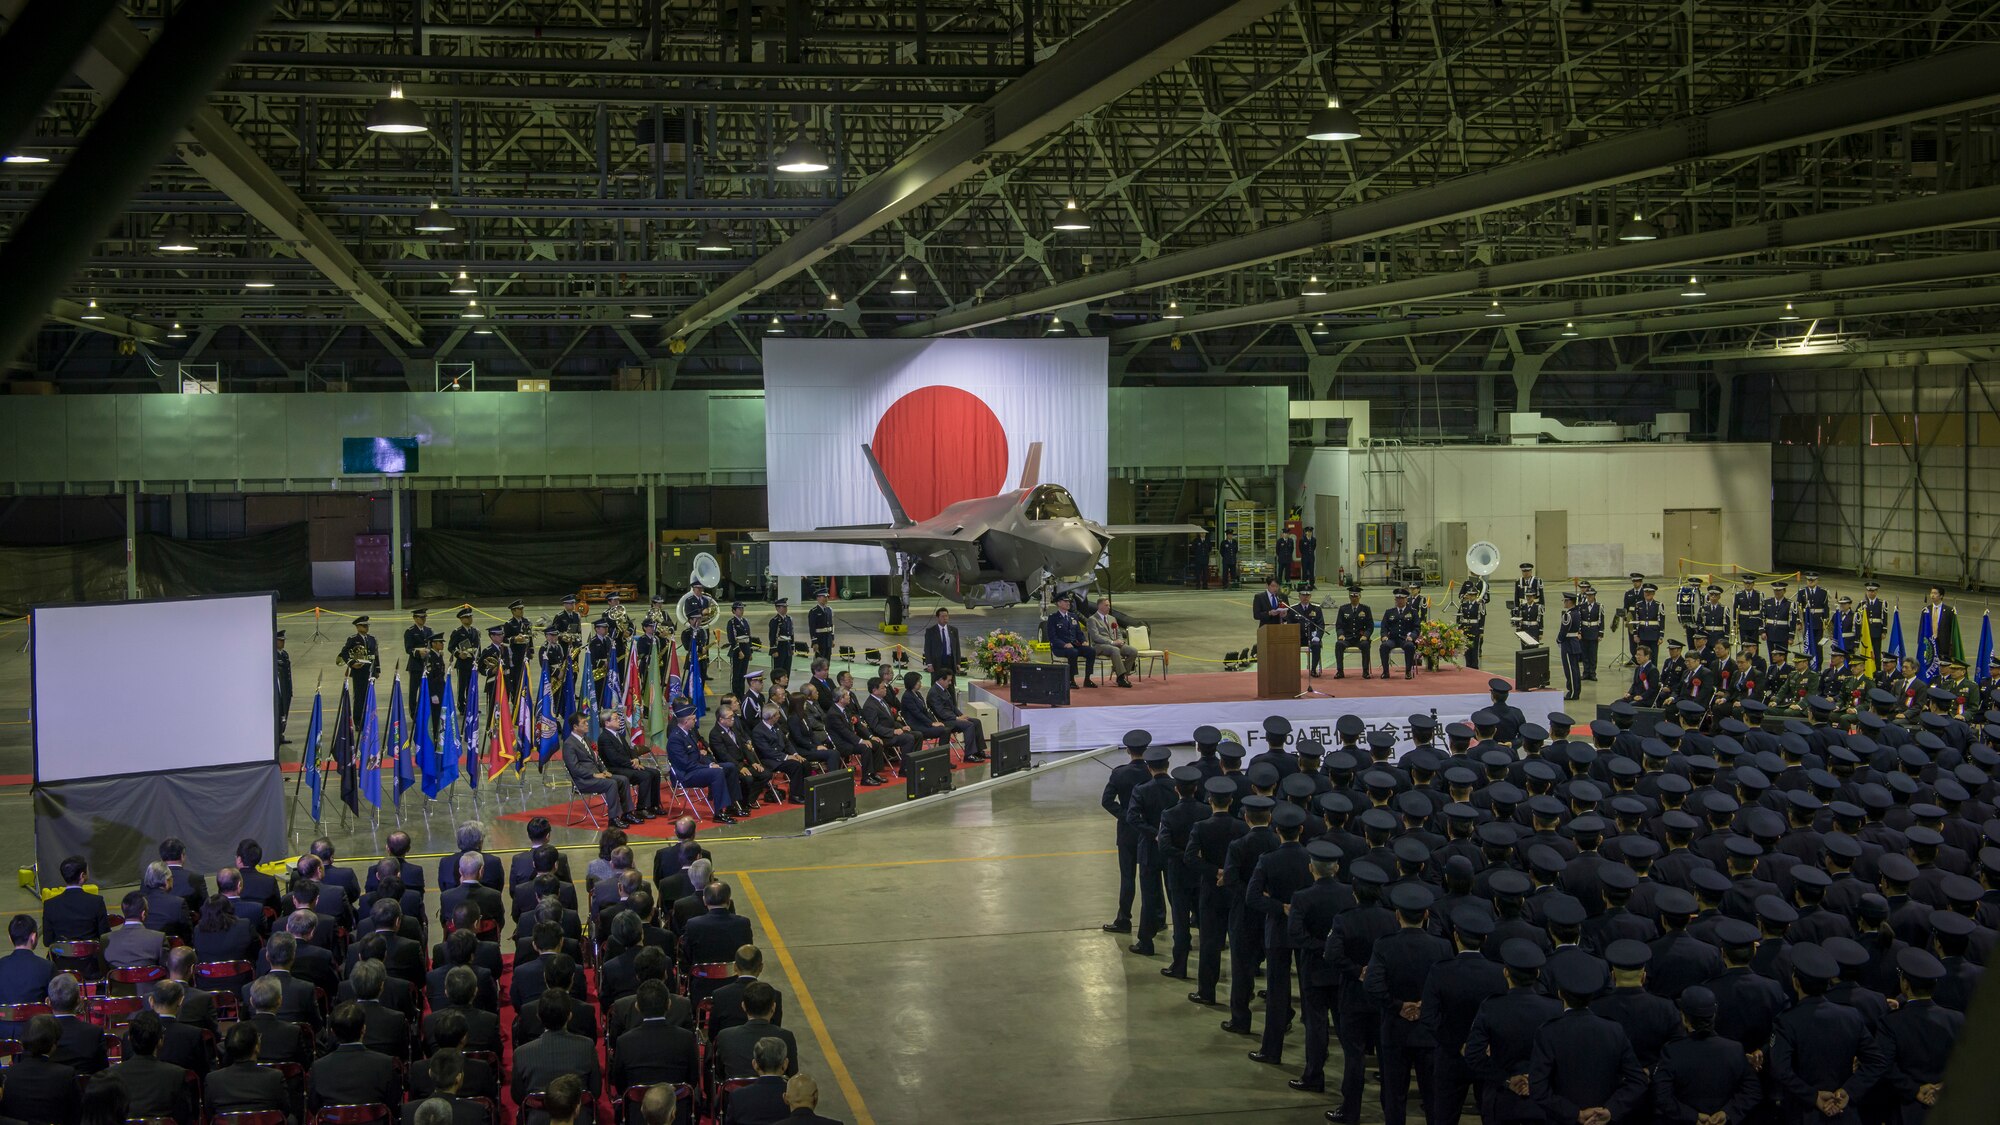 Senior leaders of Japan’s Ministry of Defense, U.S. Forces Japan, Pacific Air Forces and Lockheed Martin gather in a Japan Air Self-Defense Force hangar at Misawa Air Base, Japan, for the commemorative ceremony welcoming the first operational F-35A Lightning II to JASDF's 3rd Air Wing, Feb. 24, 2018. The F-35A is the second assembled at Mitsubishi’s facility in Nagoya, Japan. Regional leaders from Misawa City and Aomori Prefecture also attended the ceremony. (U.S. Air Force photo by Tech. Sgt. Benjamin W. Stratton)